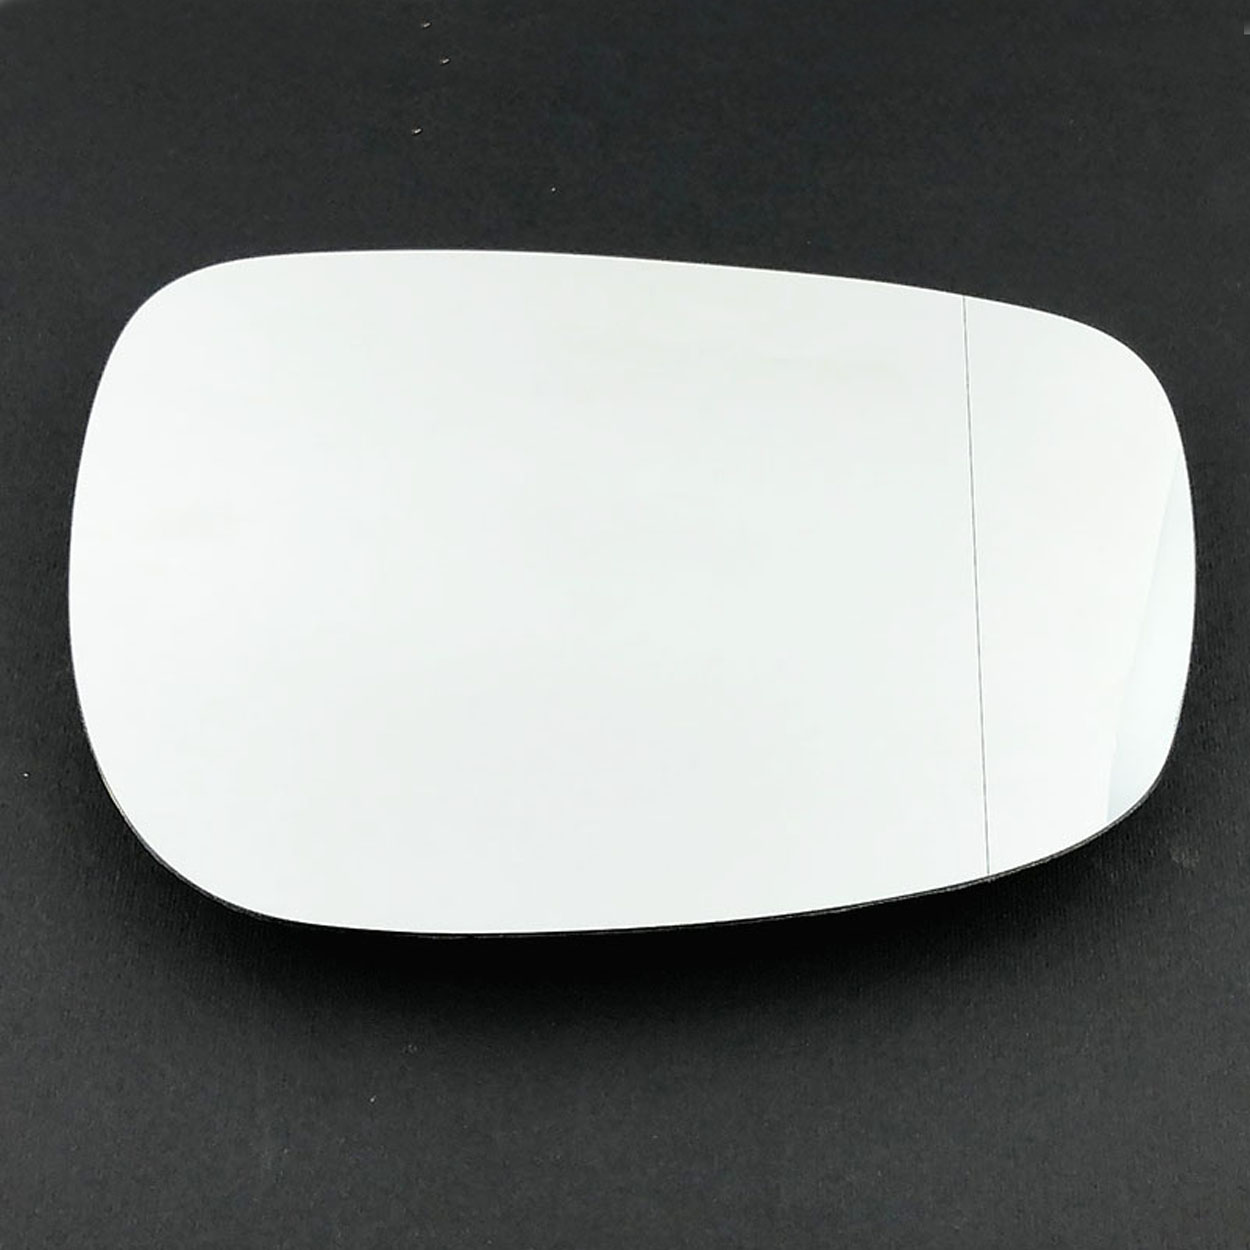 Mazda CX 5 Wing Mirror Glass RIGHT HAND ( UK Driver Side ) 2012 to 2018 – Wide Angle Wing Mirror